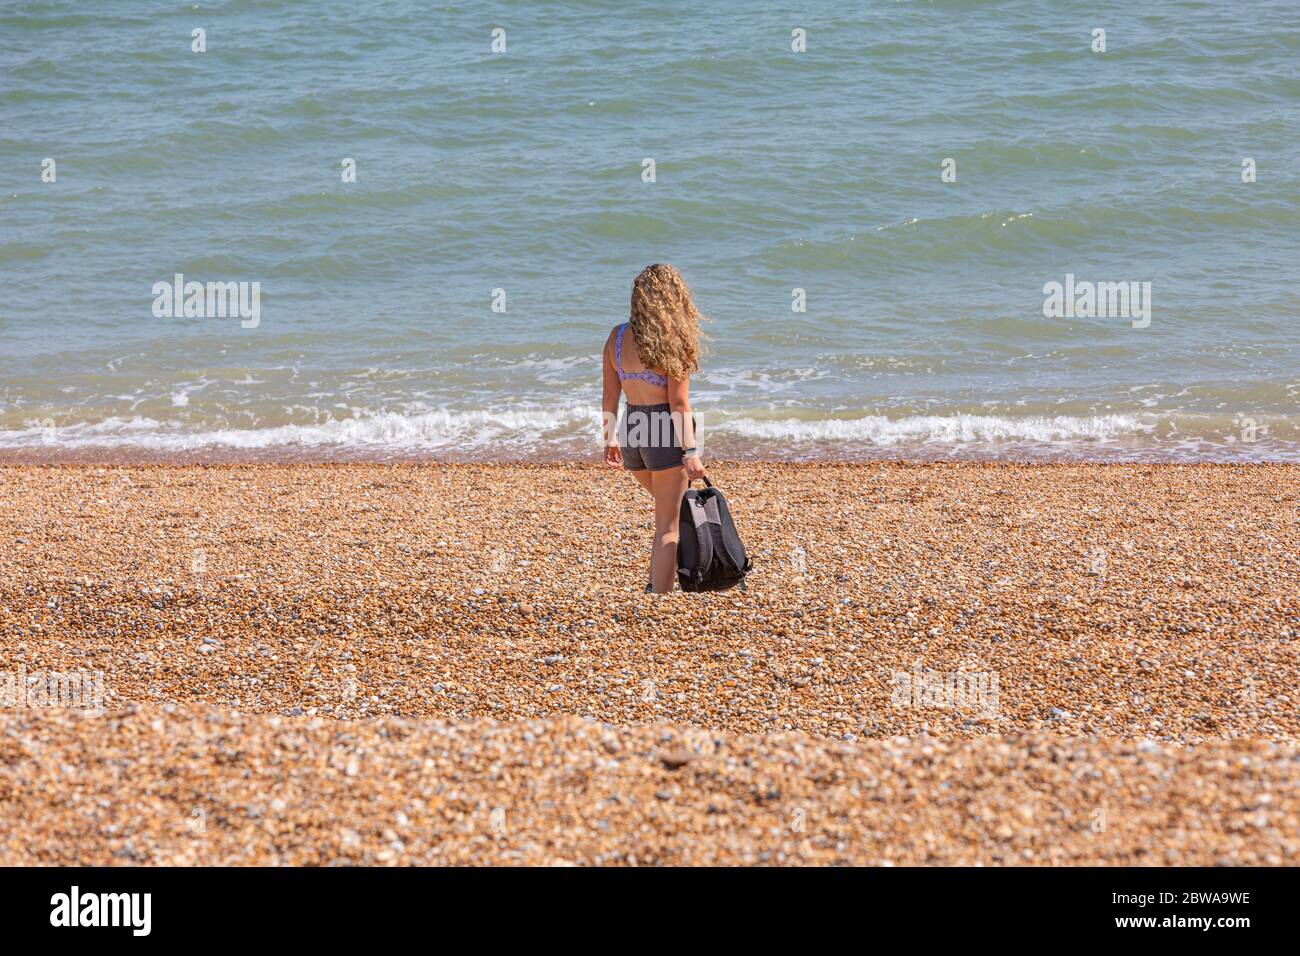 A beach scene in Kent, UK during the covid  pandemic lockdown Stock Photo